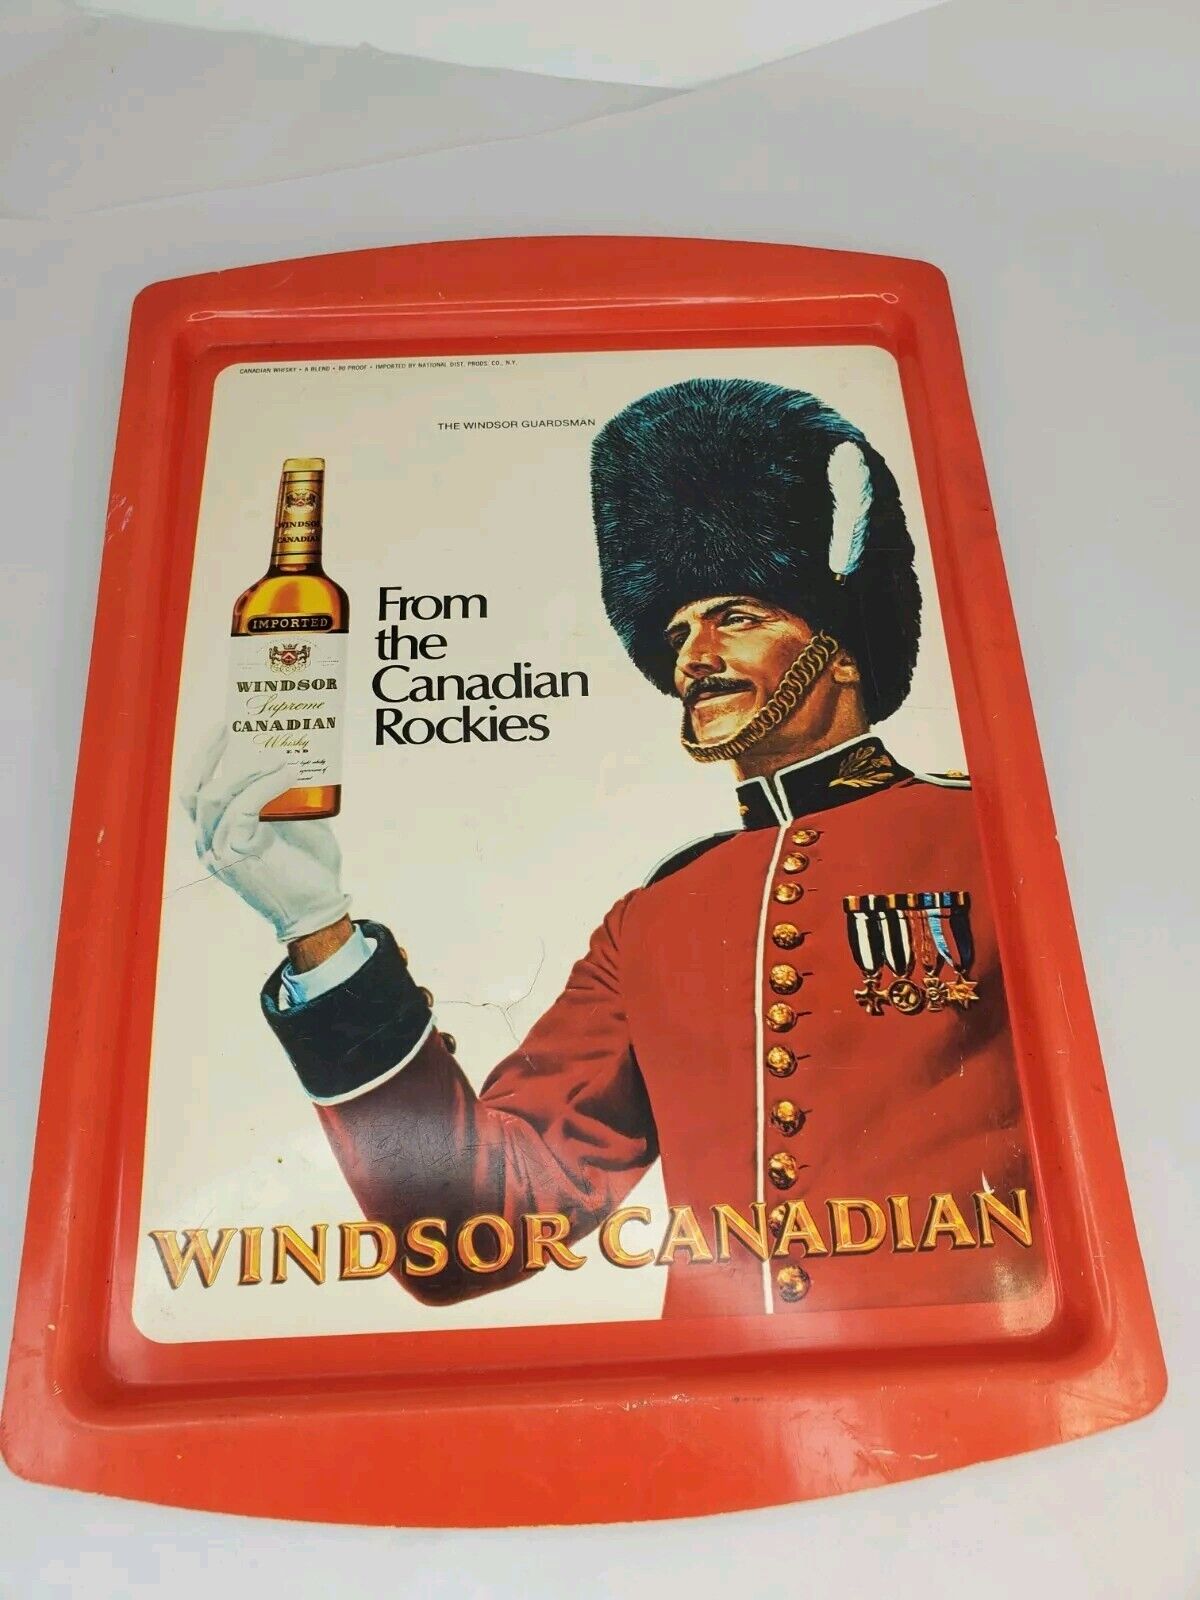 VINTAGE 1970S WINDSOR CANADIAN SERVING TRAY 16×12 Inches